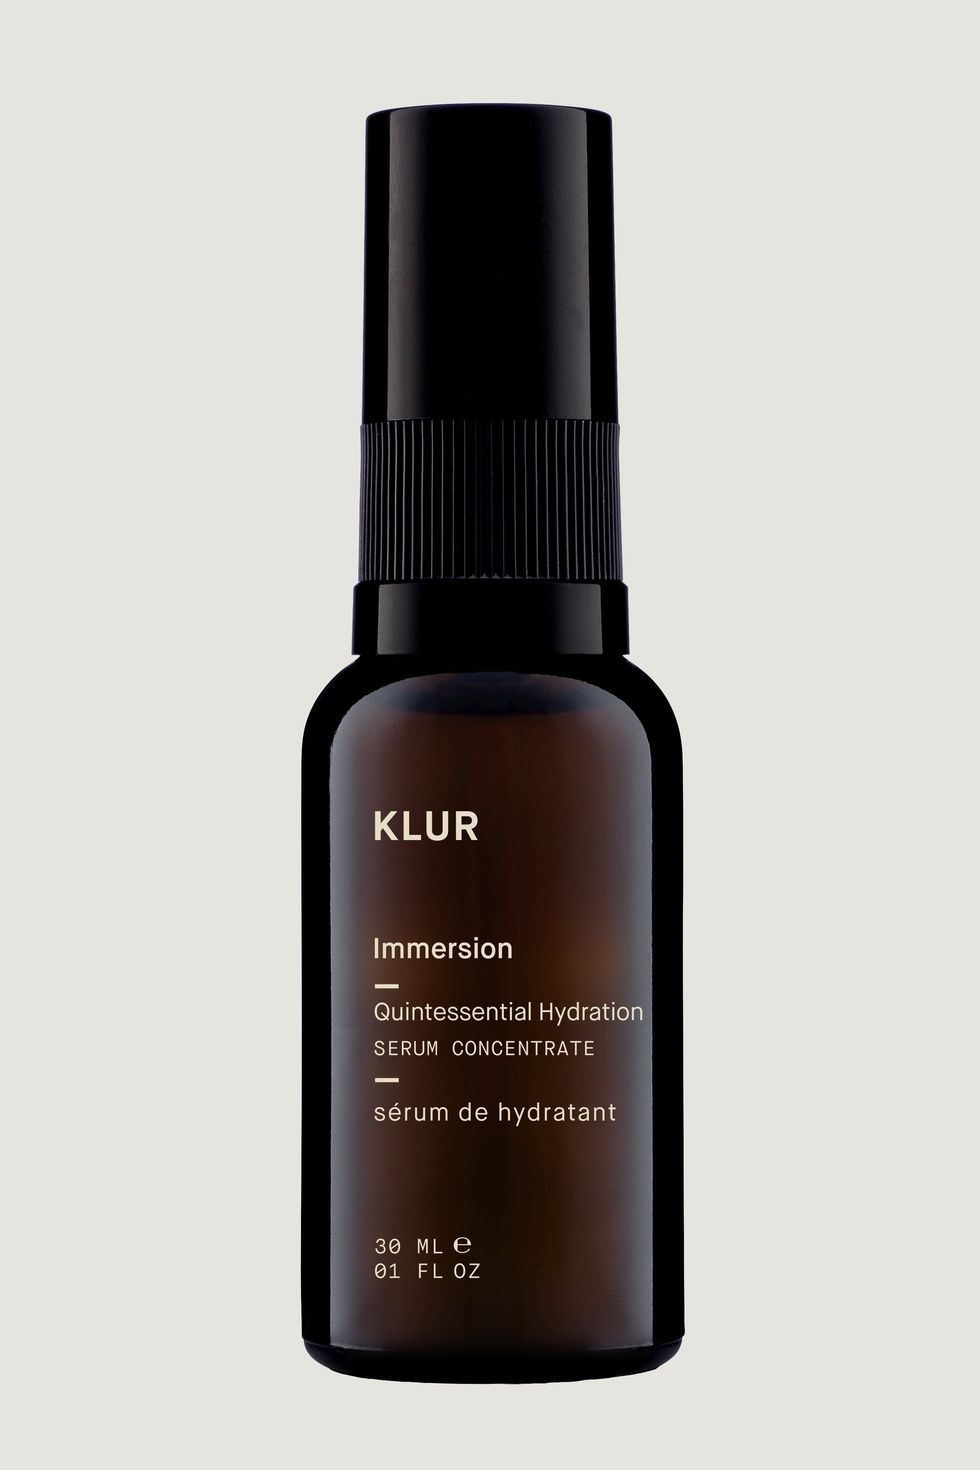 Klur Immersion Quintessential Hydration Serum Concentrate